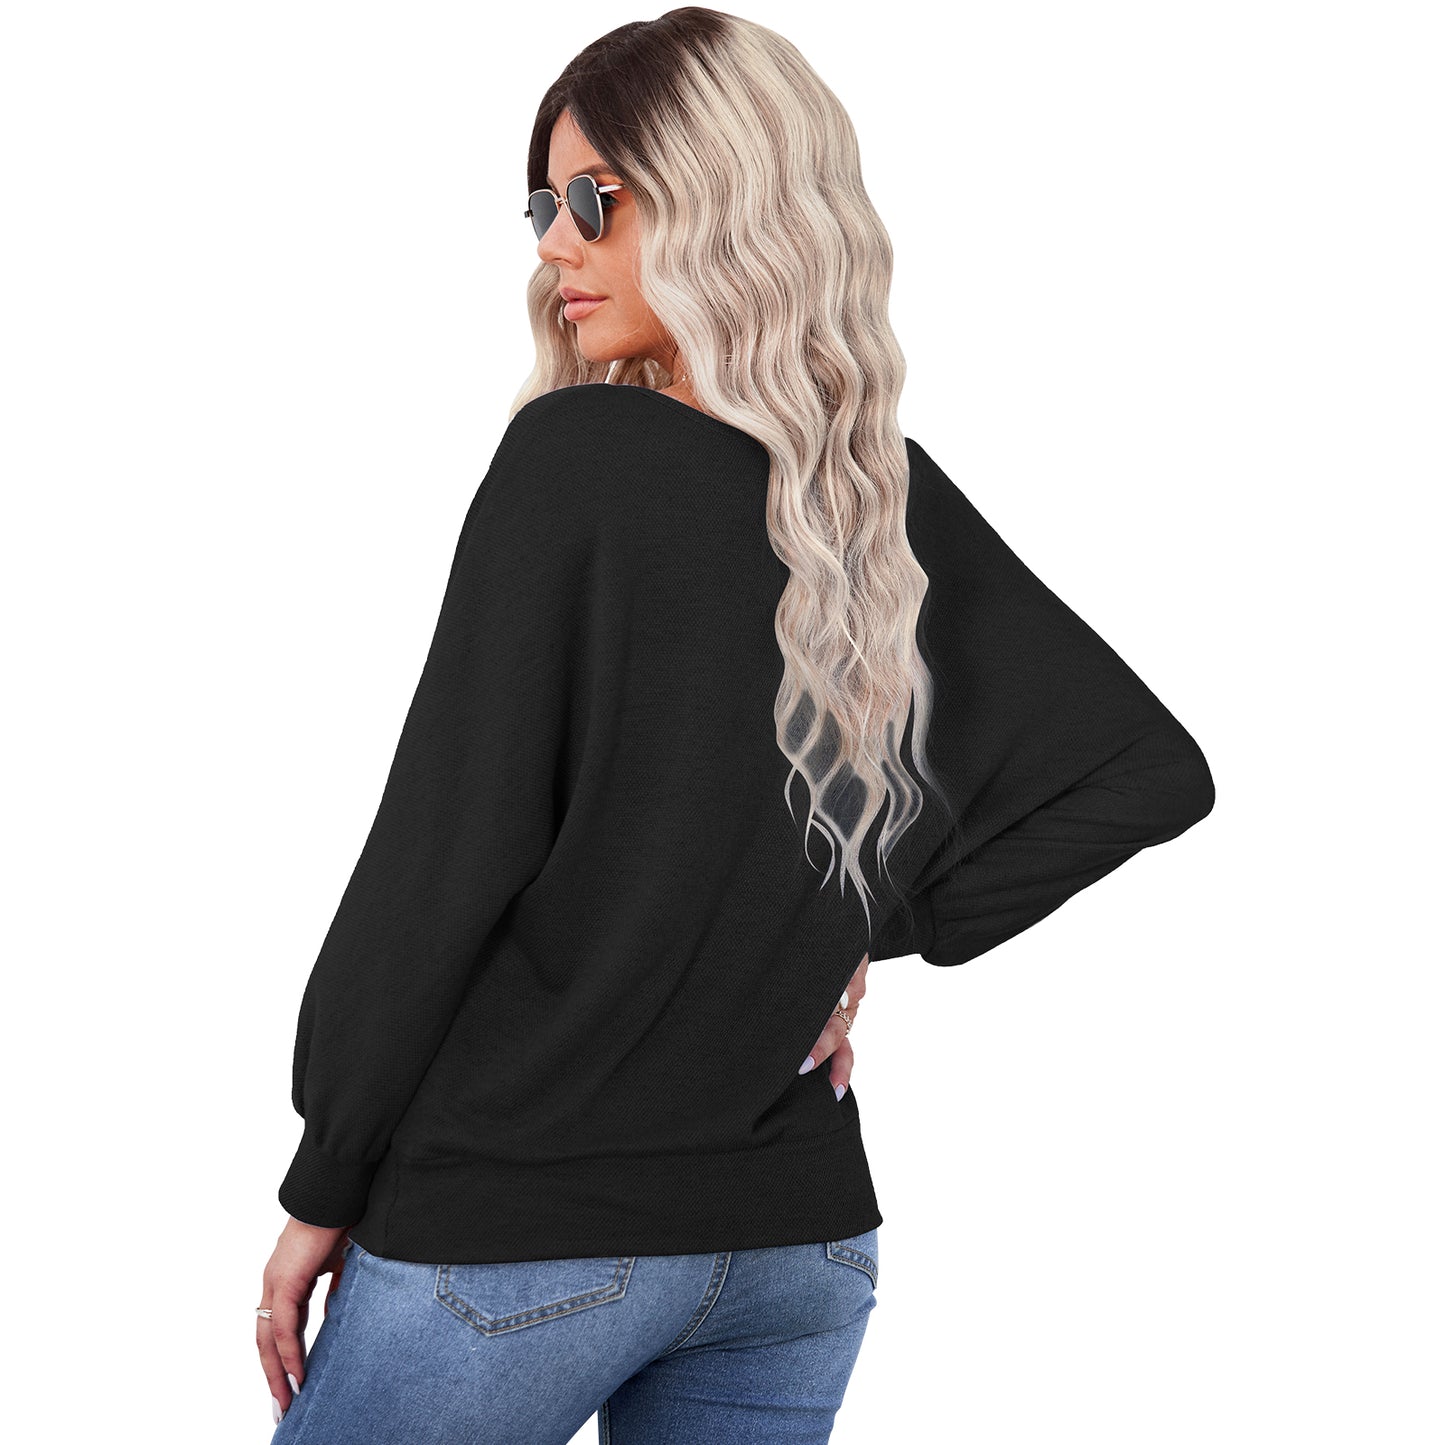 YESFASHION Neck Pullover Bottoming Shirt Stitching T-shirt Tops